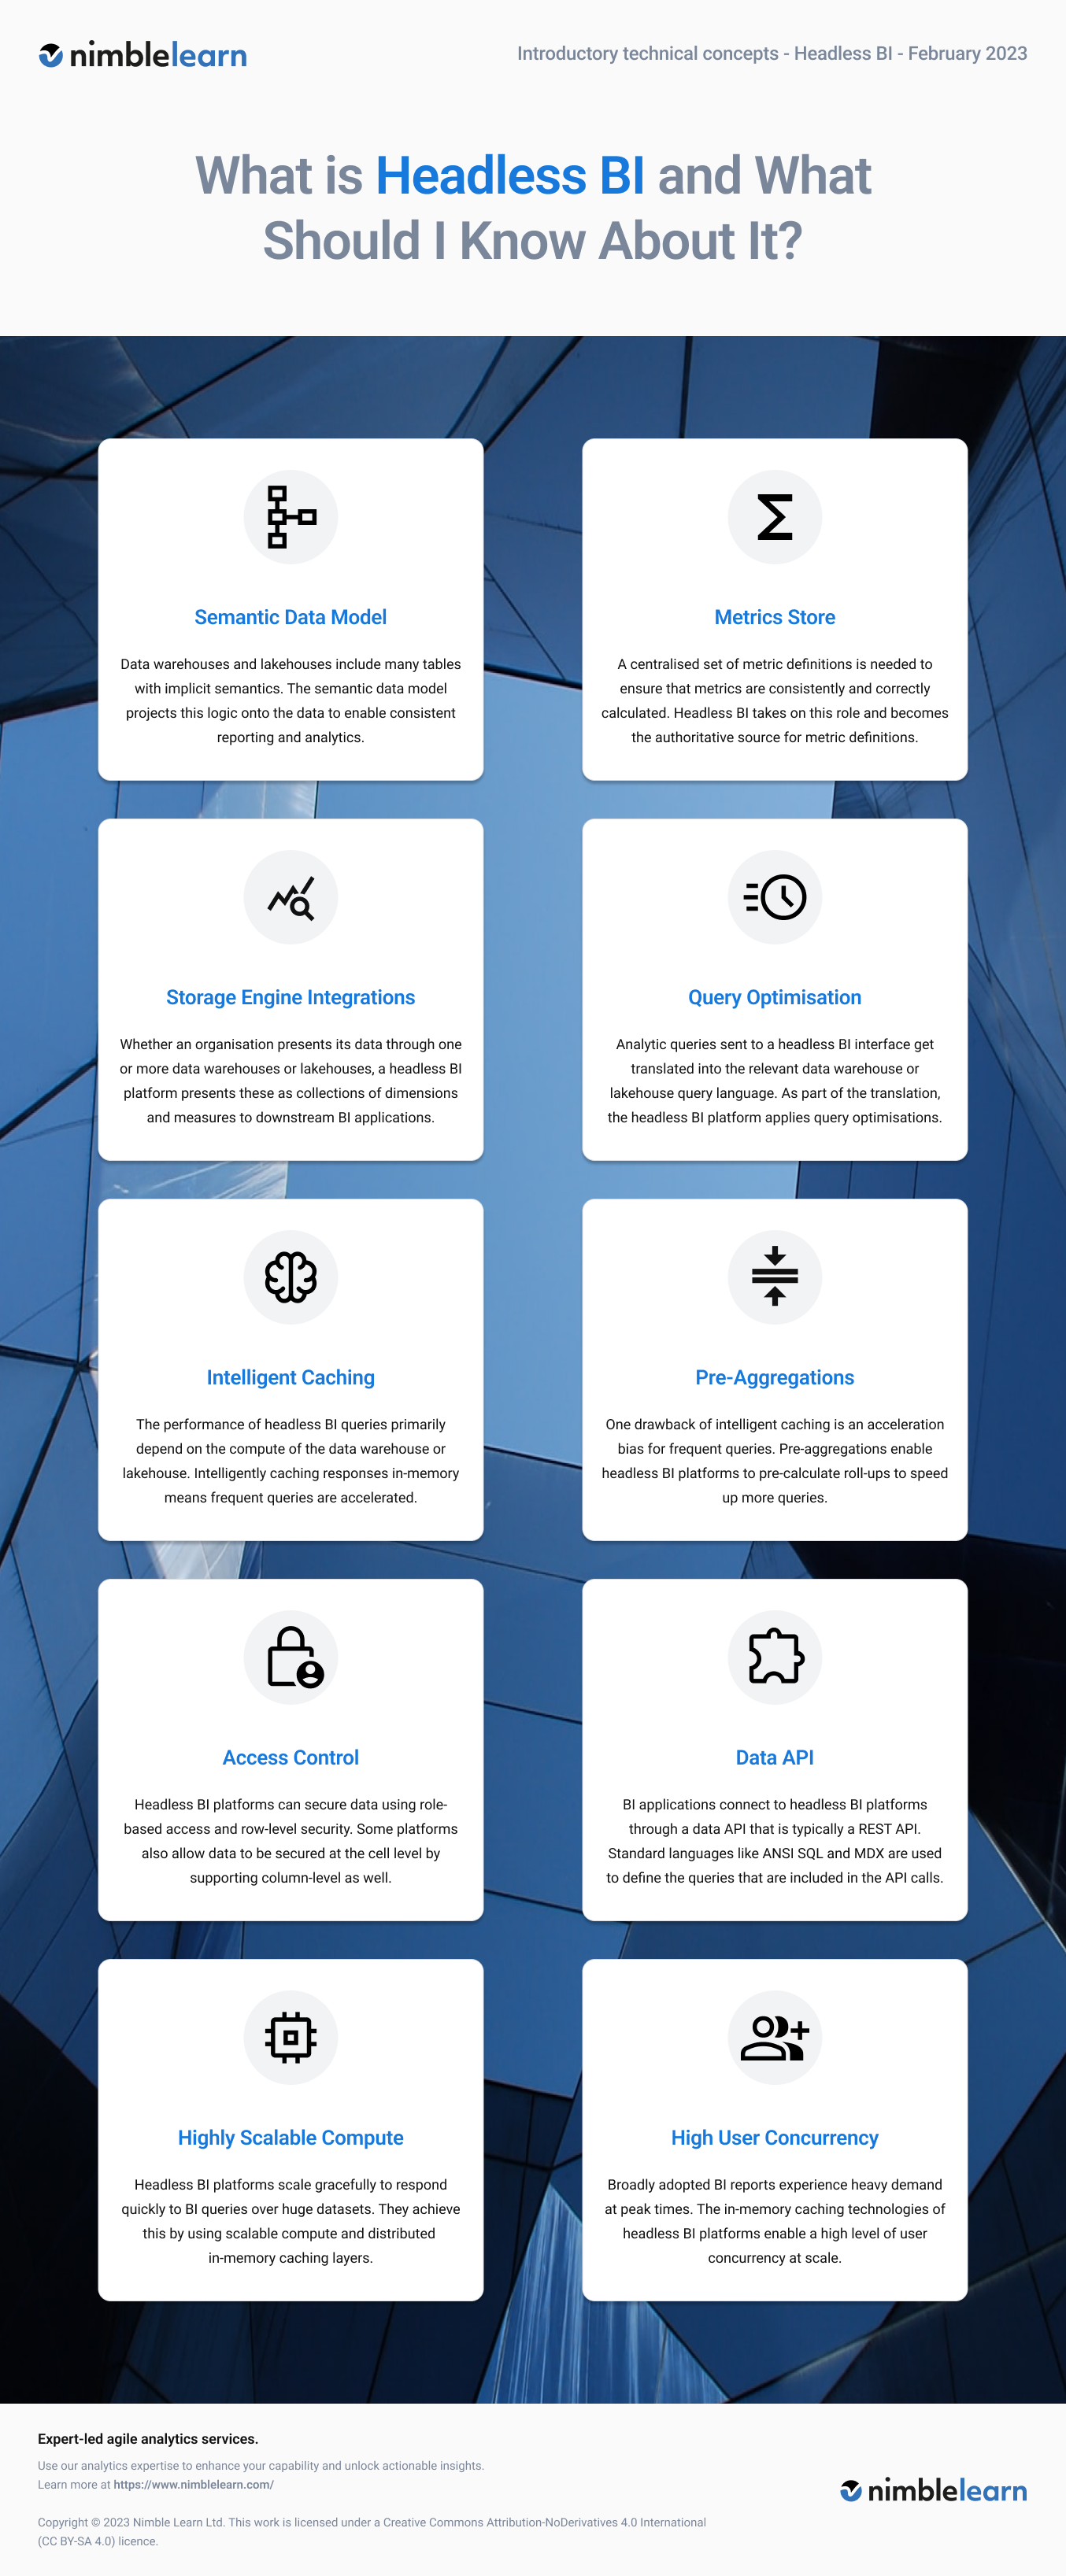 Introductory Technical Concepts for Headless BI Infographic